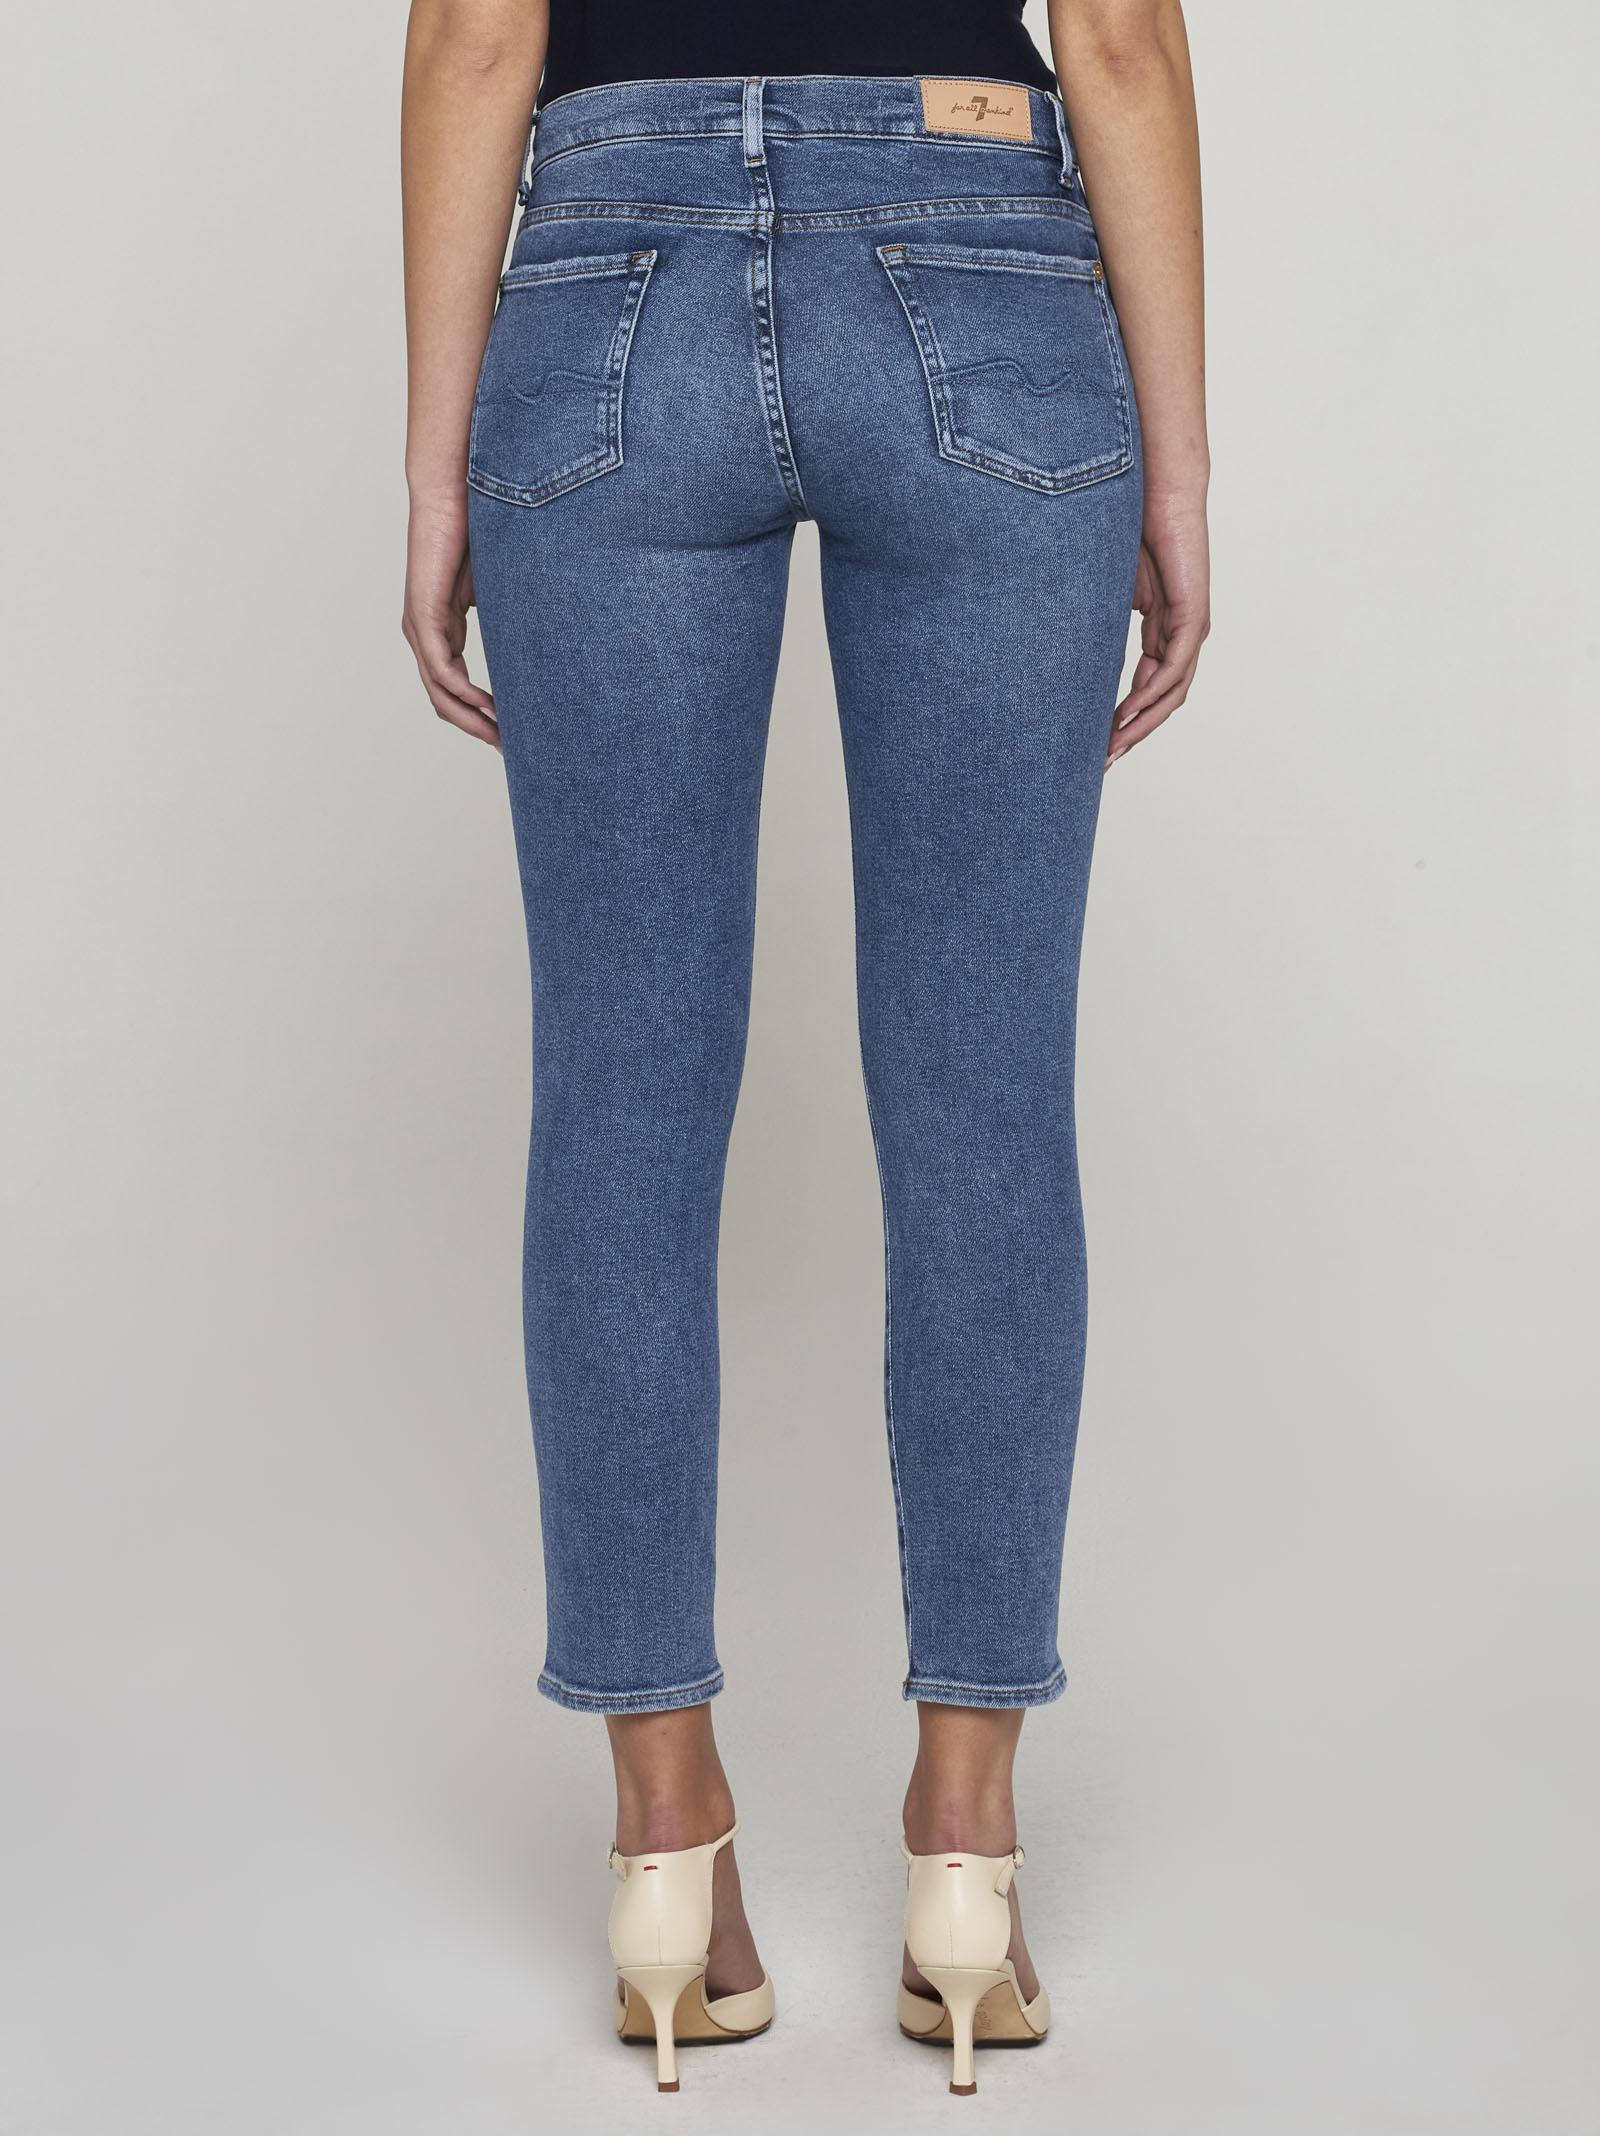 7 For All Mankind Roxanne Ankle Luxe Vintage Impulse Jeans in Blue | Lyst